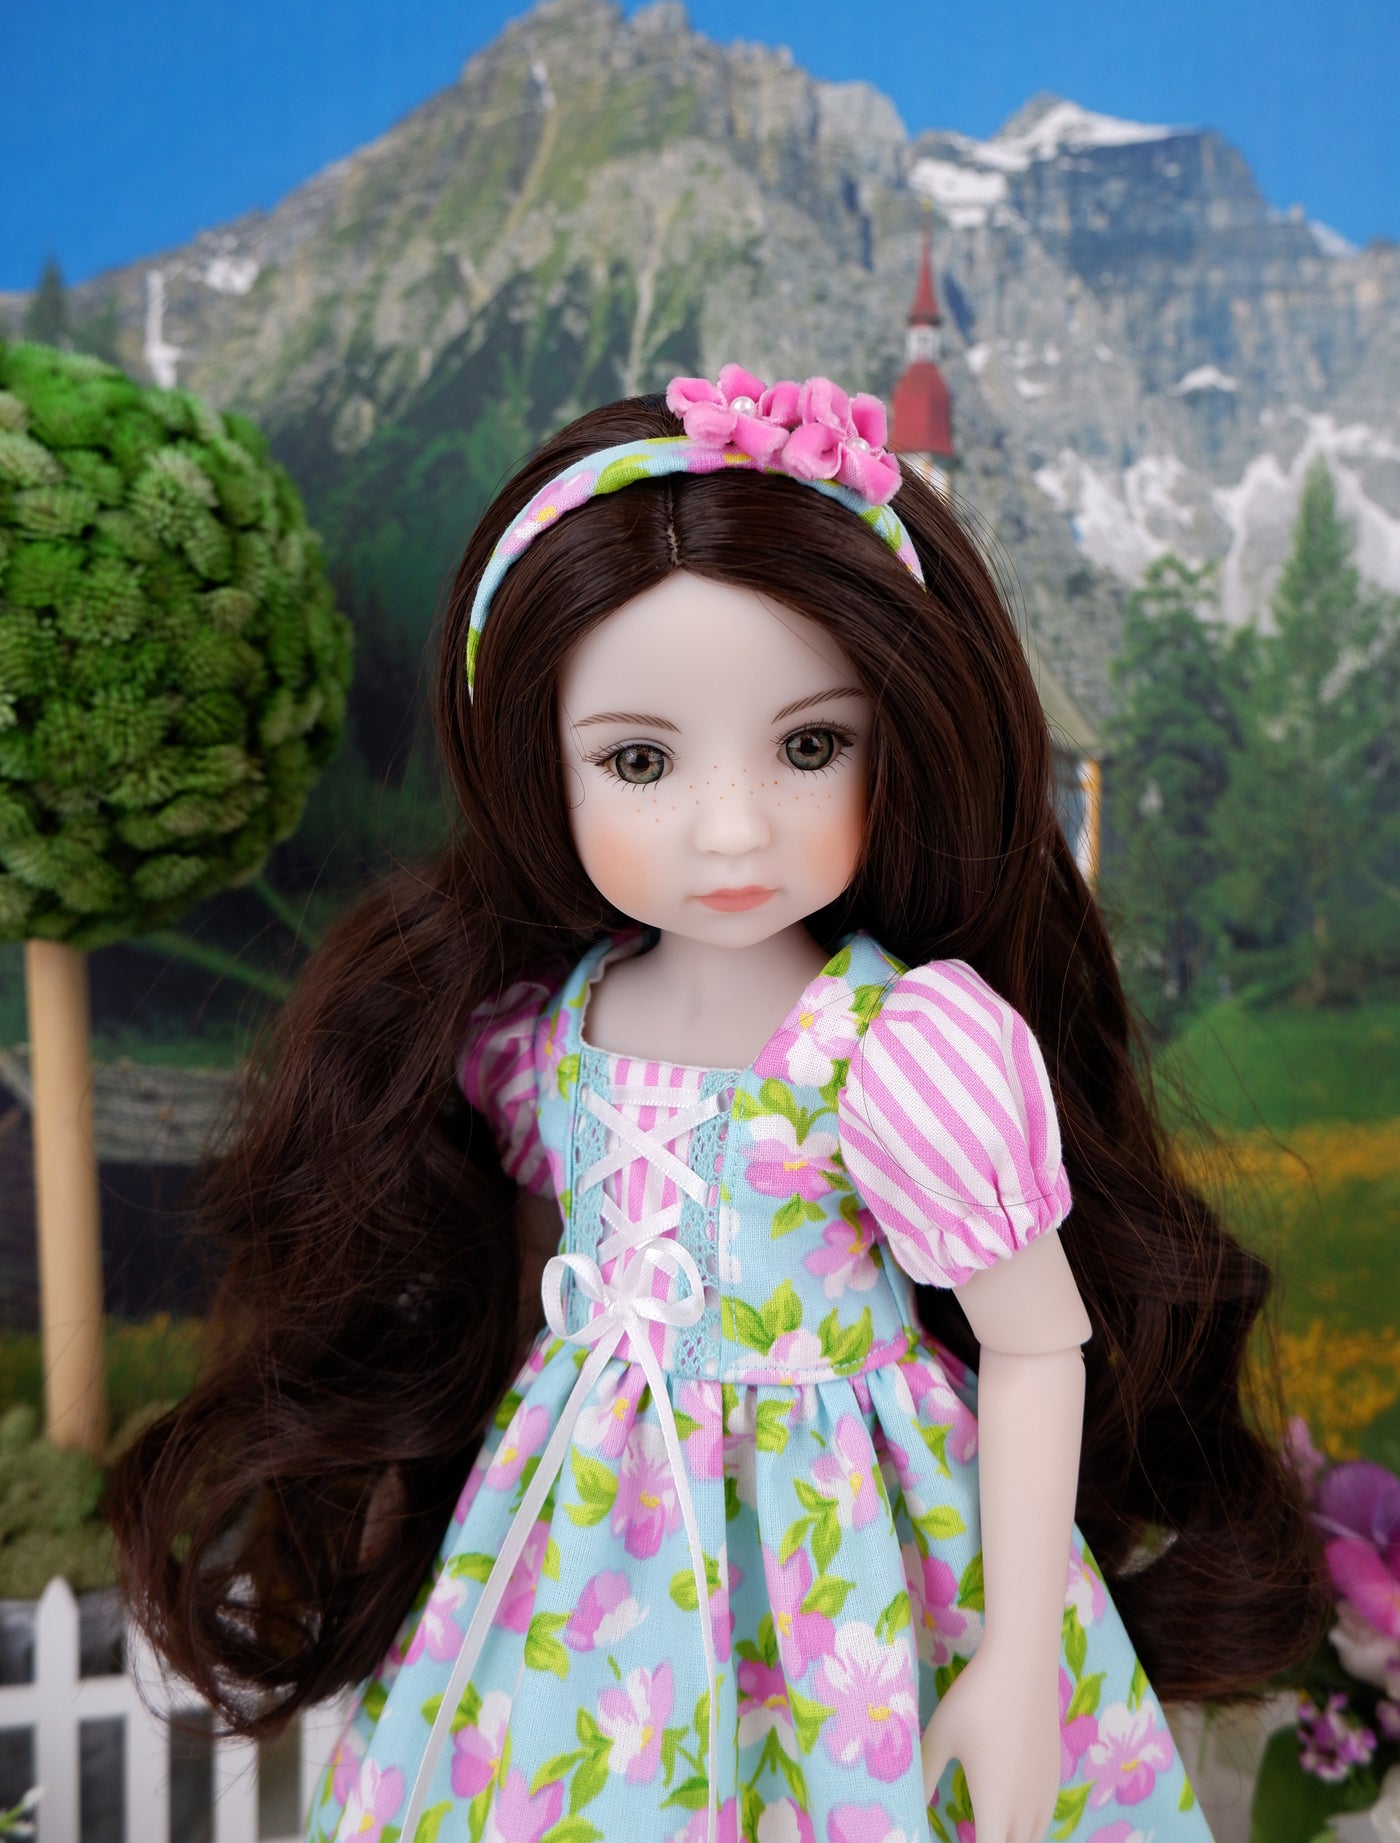 Tyrol Geranium - dress ensemble with shoes for Ruby Red Fashion Friends doll